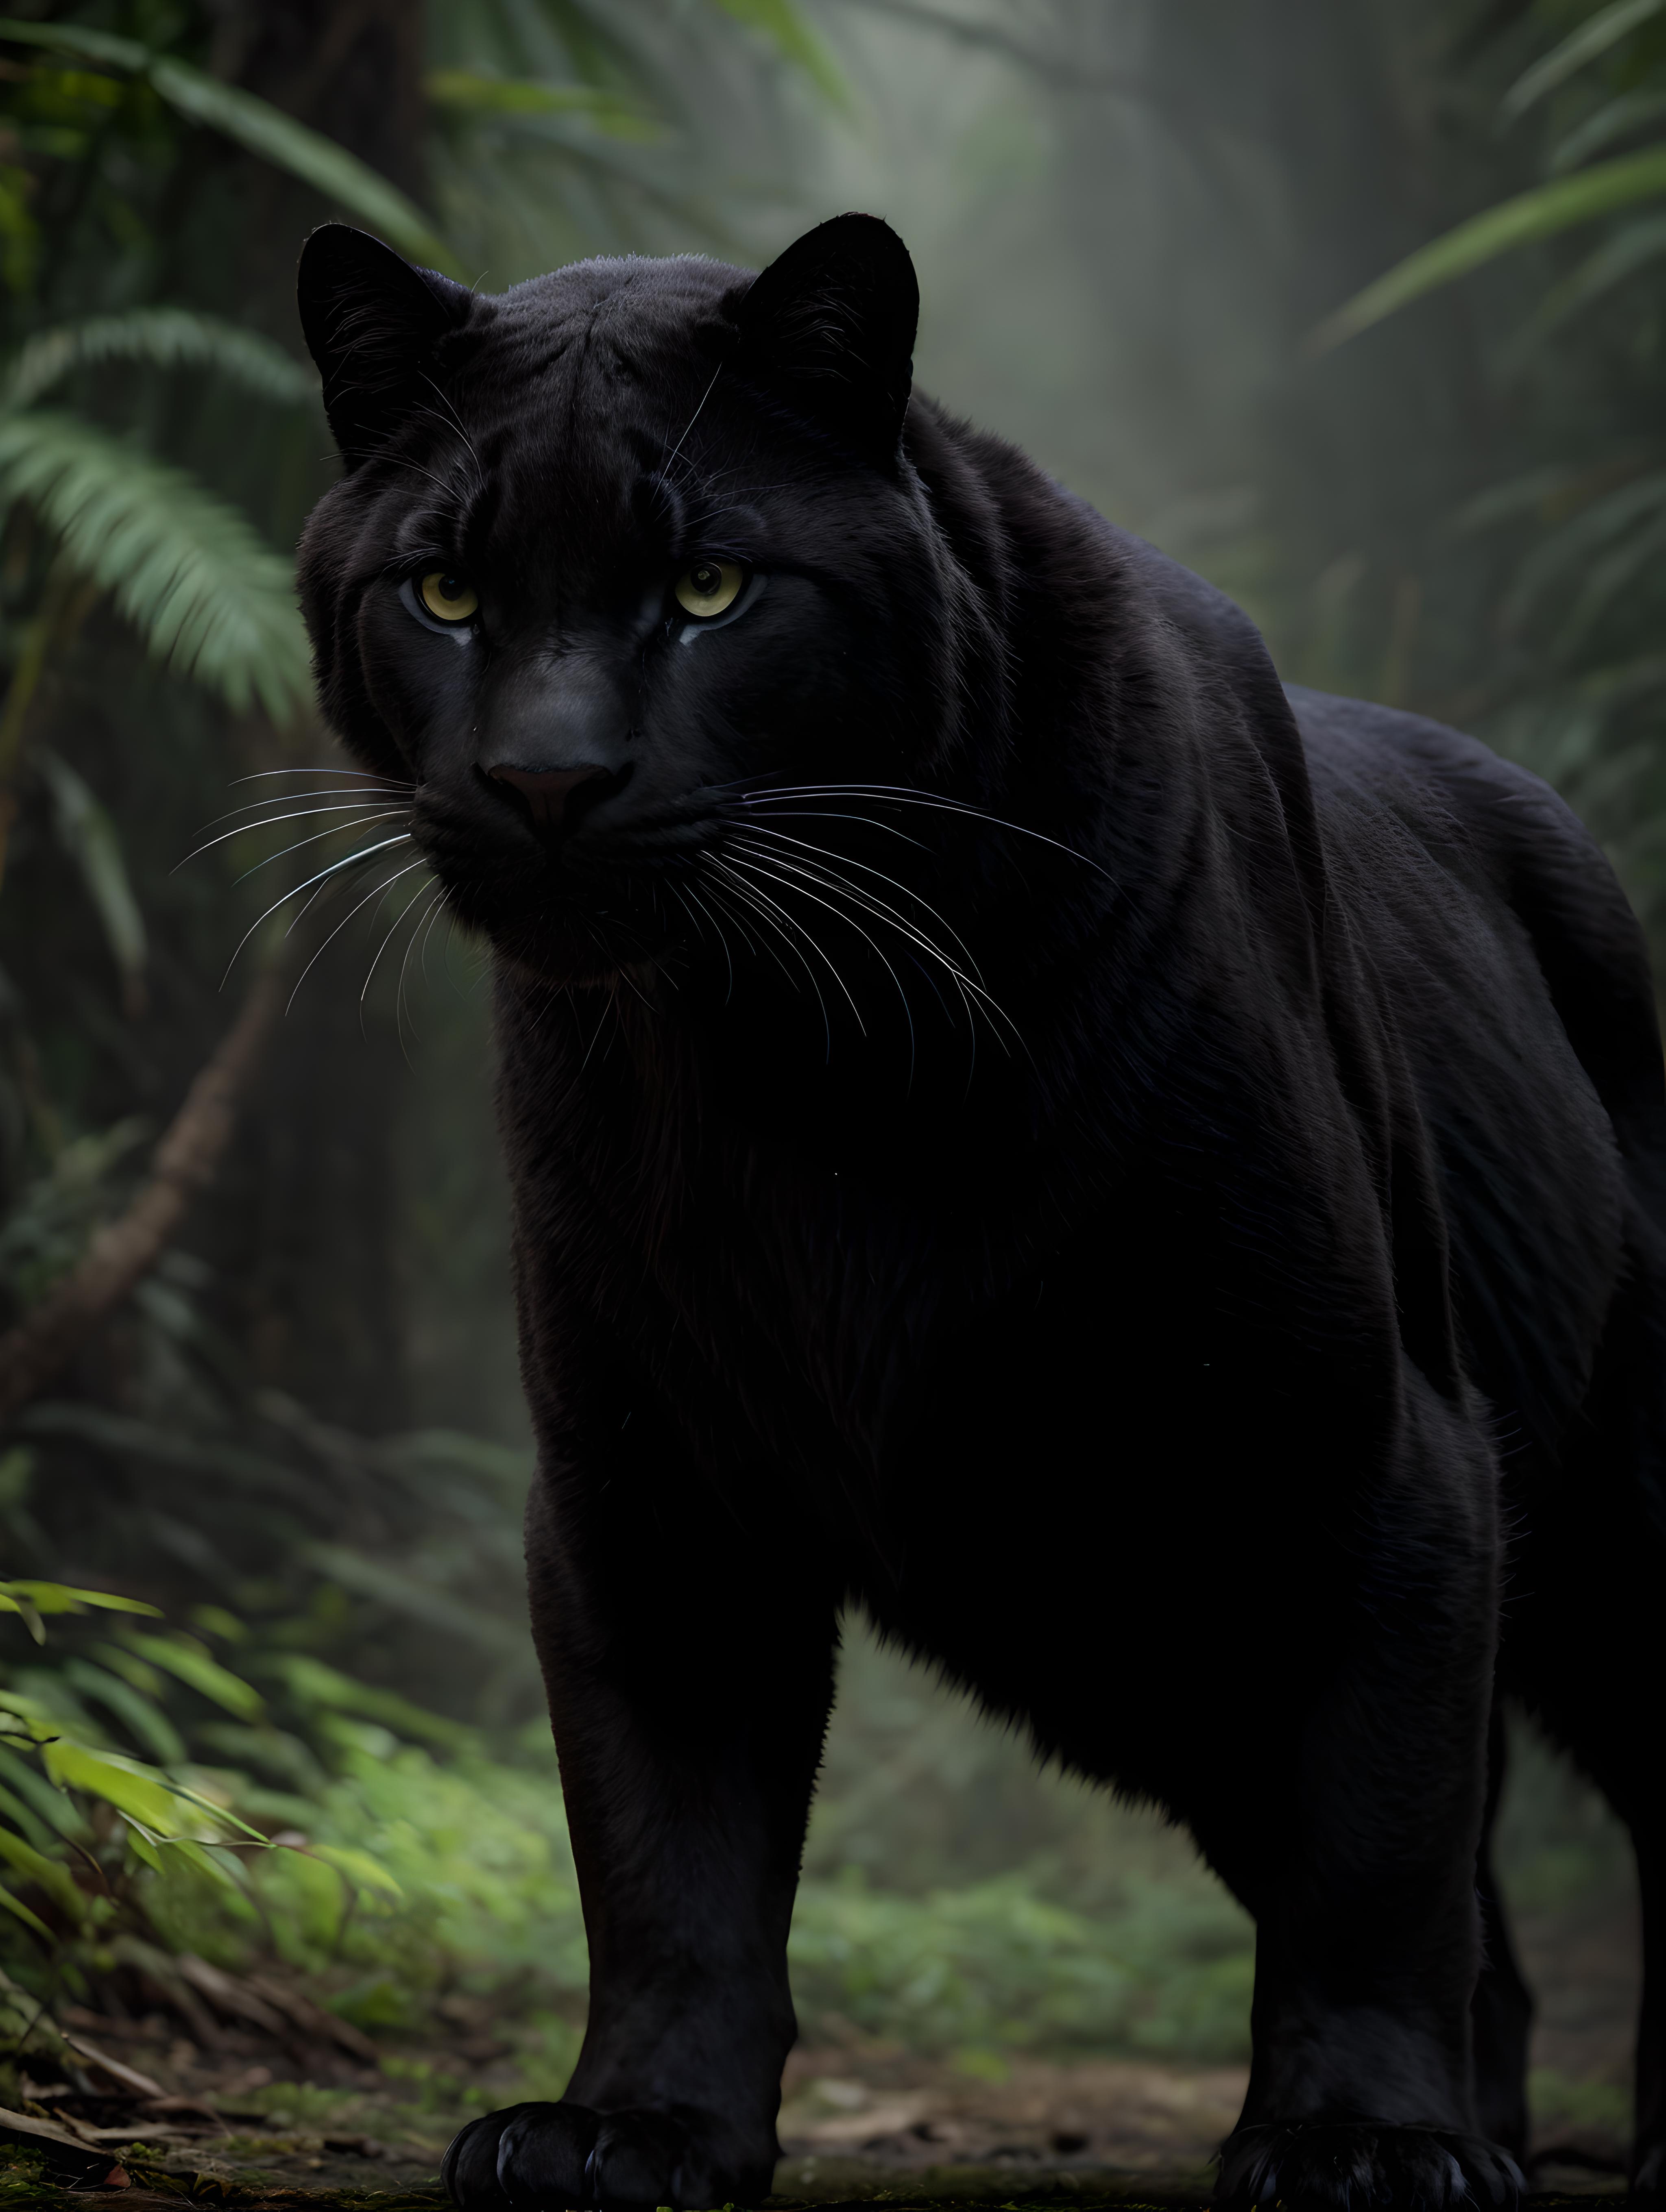 A black panther with yellow eyes in a forest.